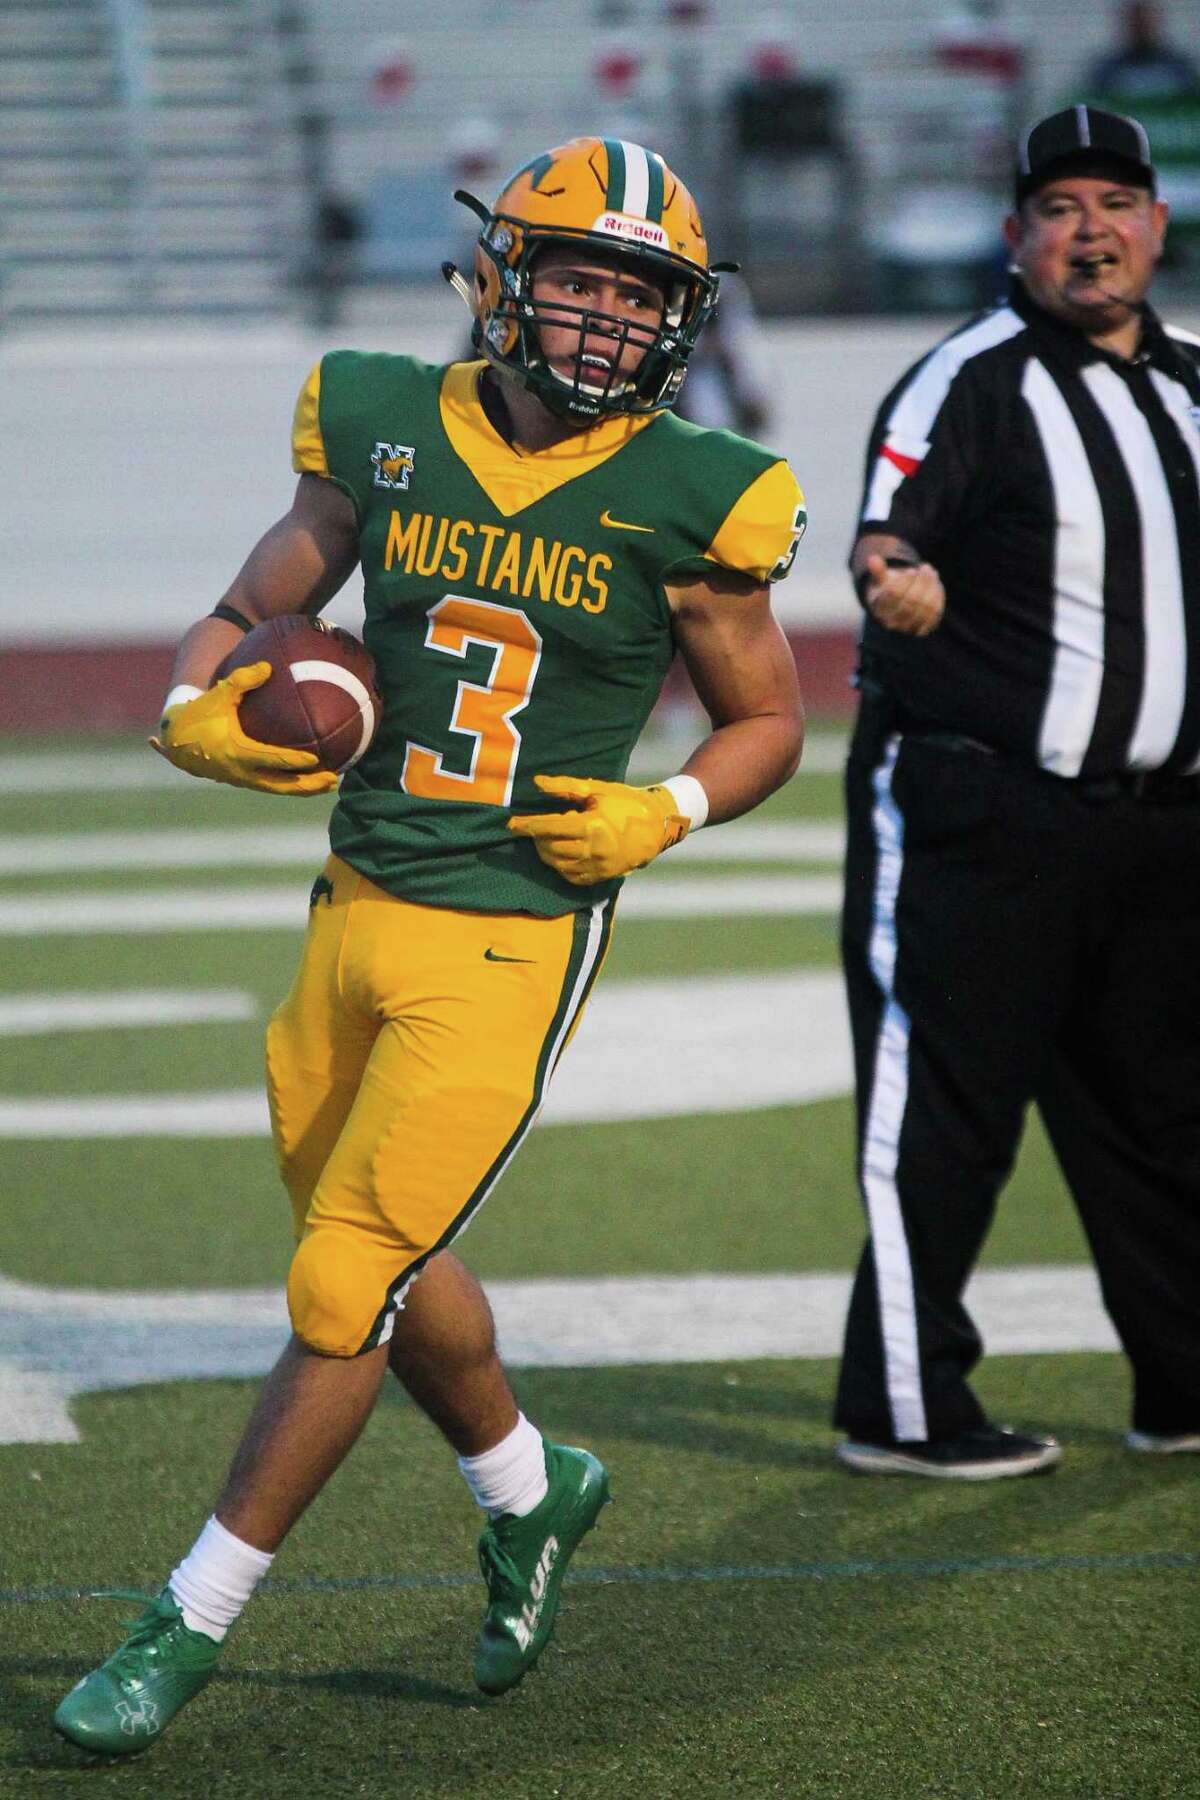 Ben Limon and the Nixon Mustangs take on the Southwest Dragons on Thursday.